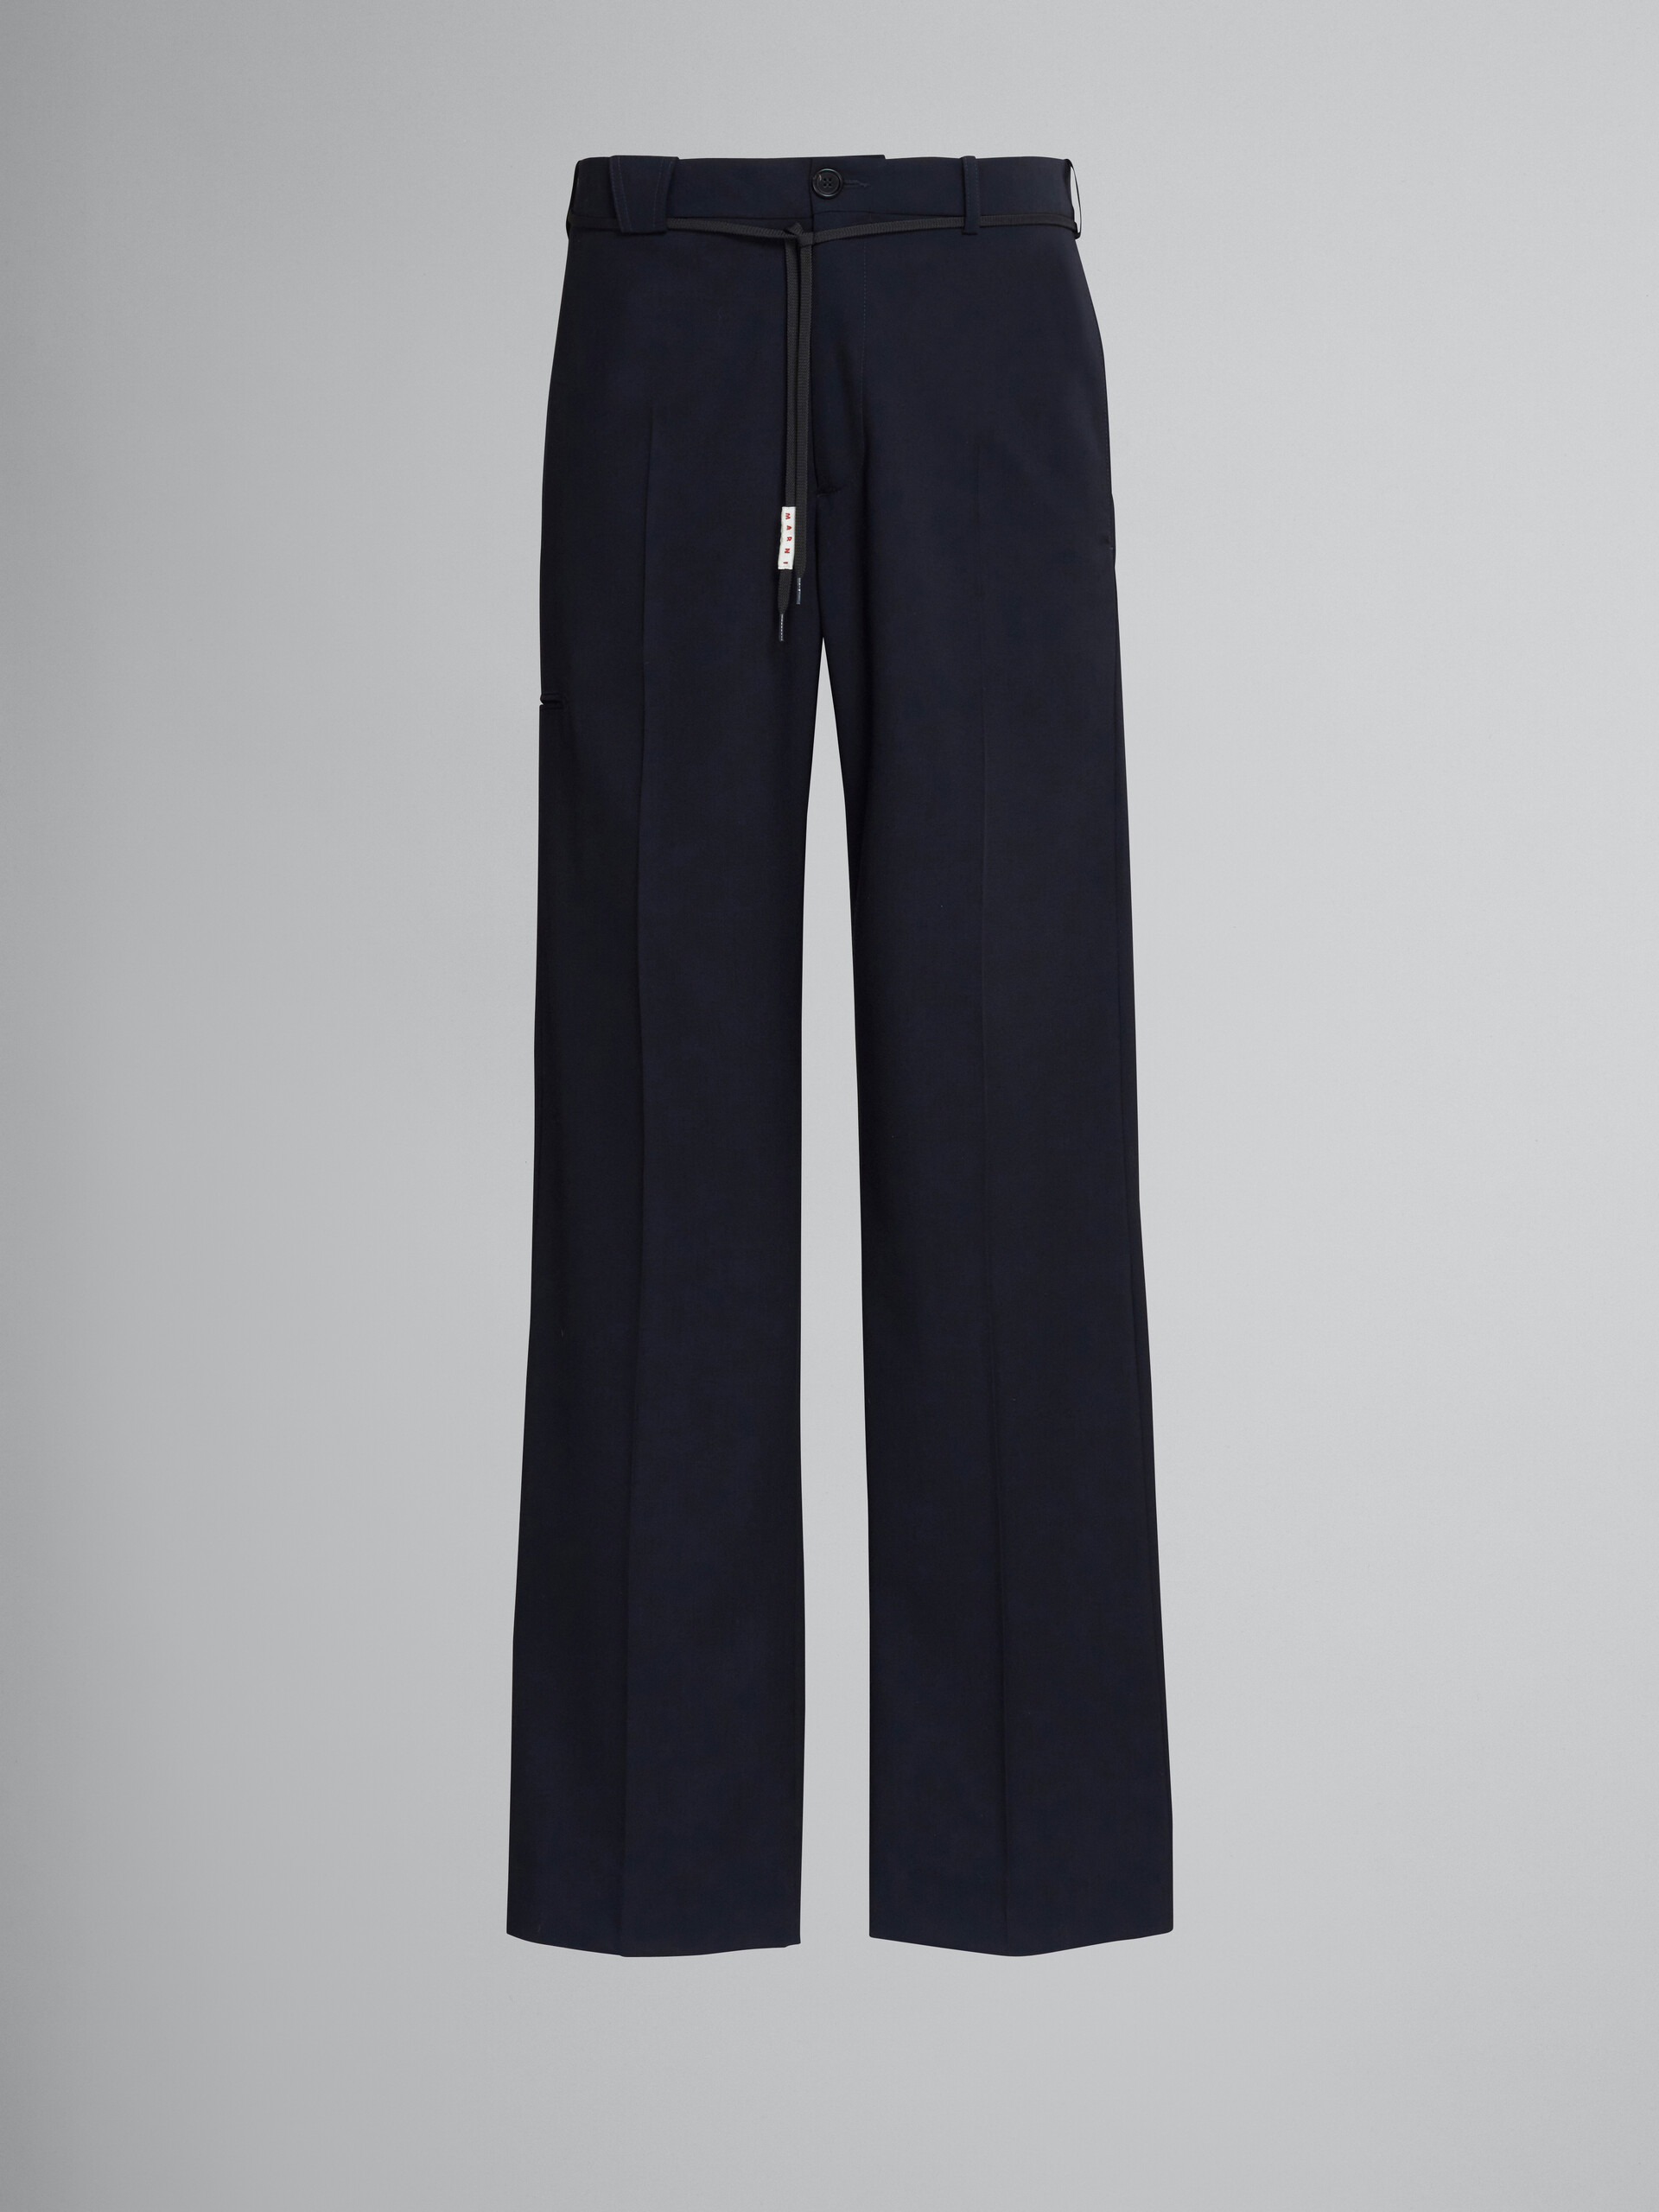 Blue tropical wool trousers - Pants - Image 1